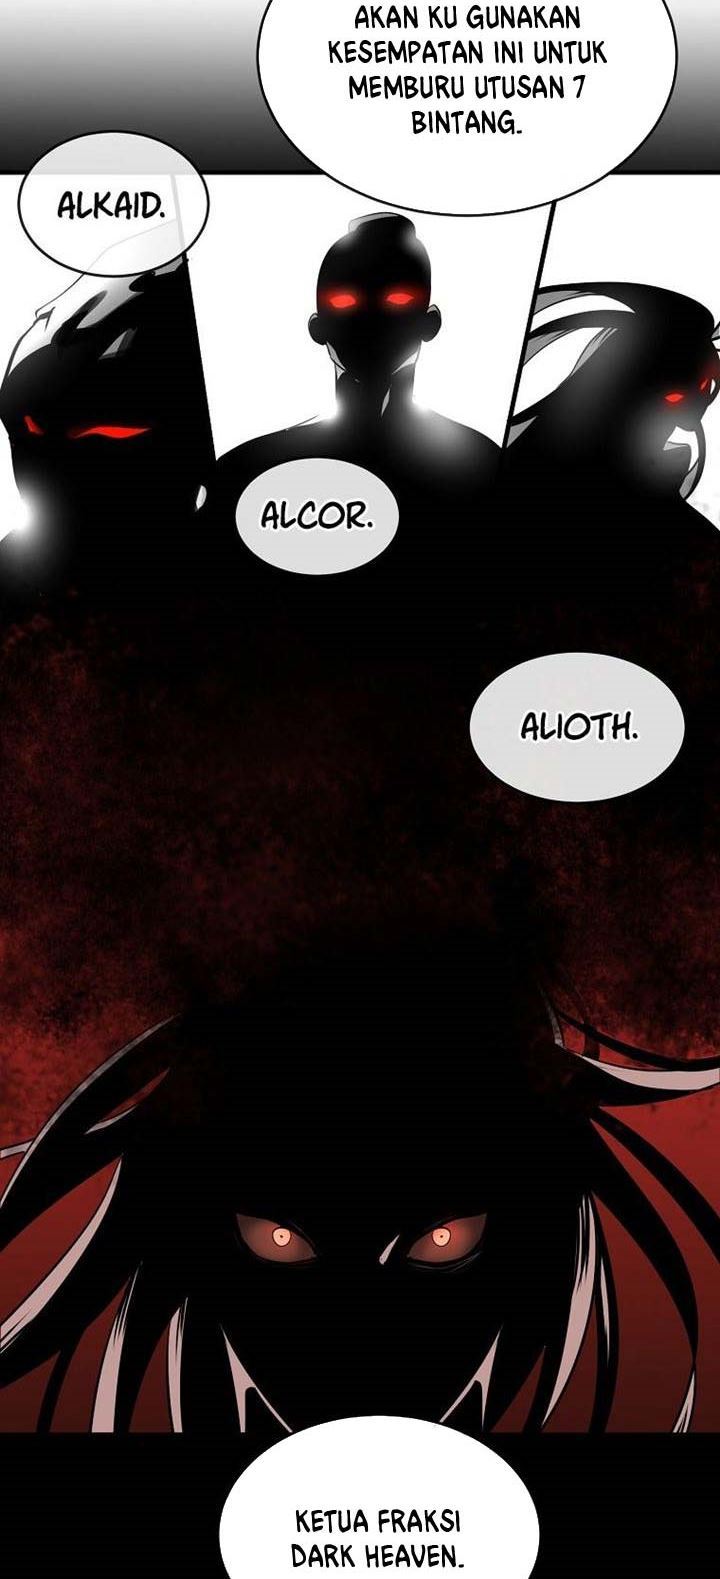 Volcanic Age Chapter 190